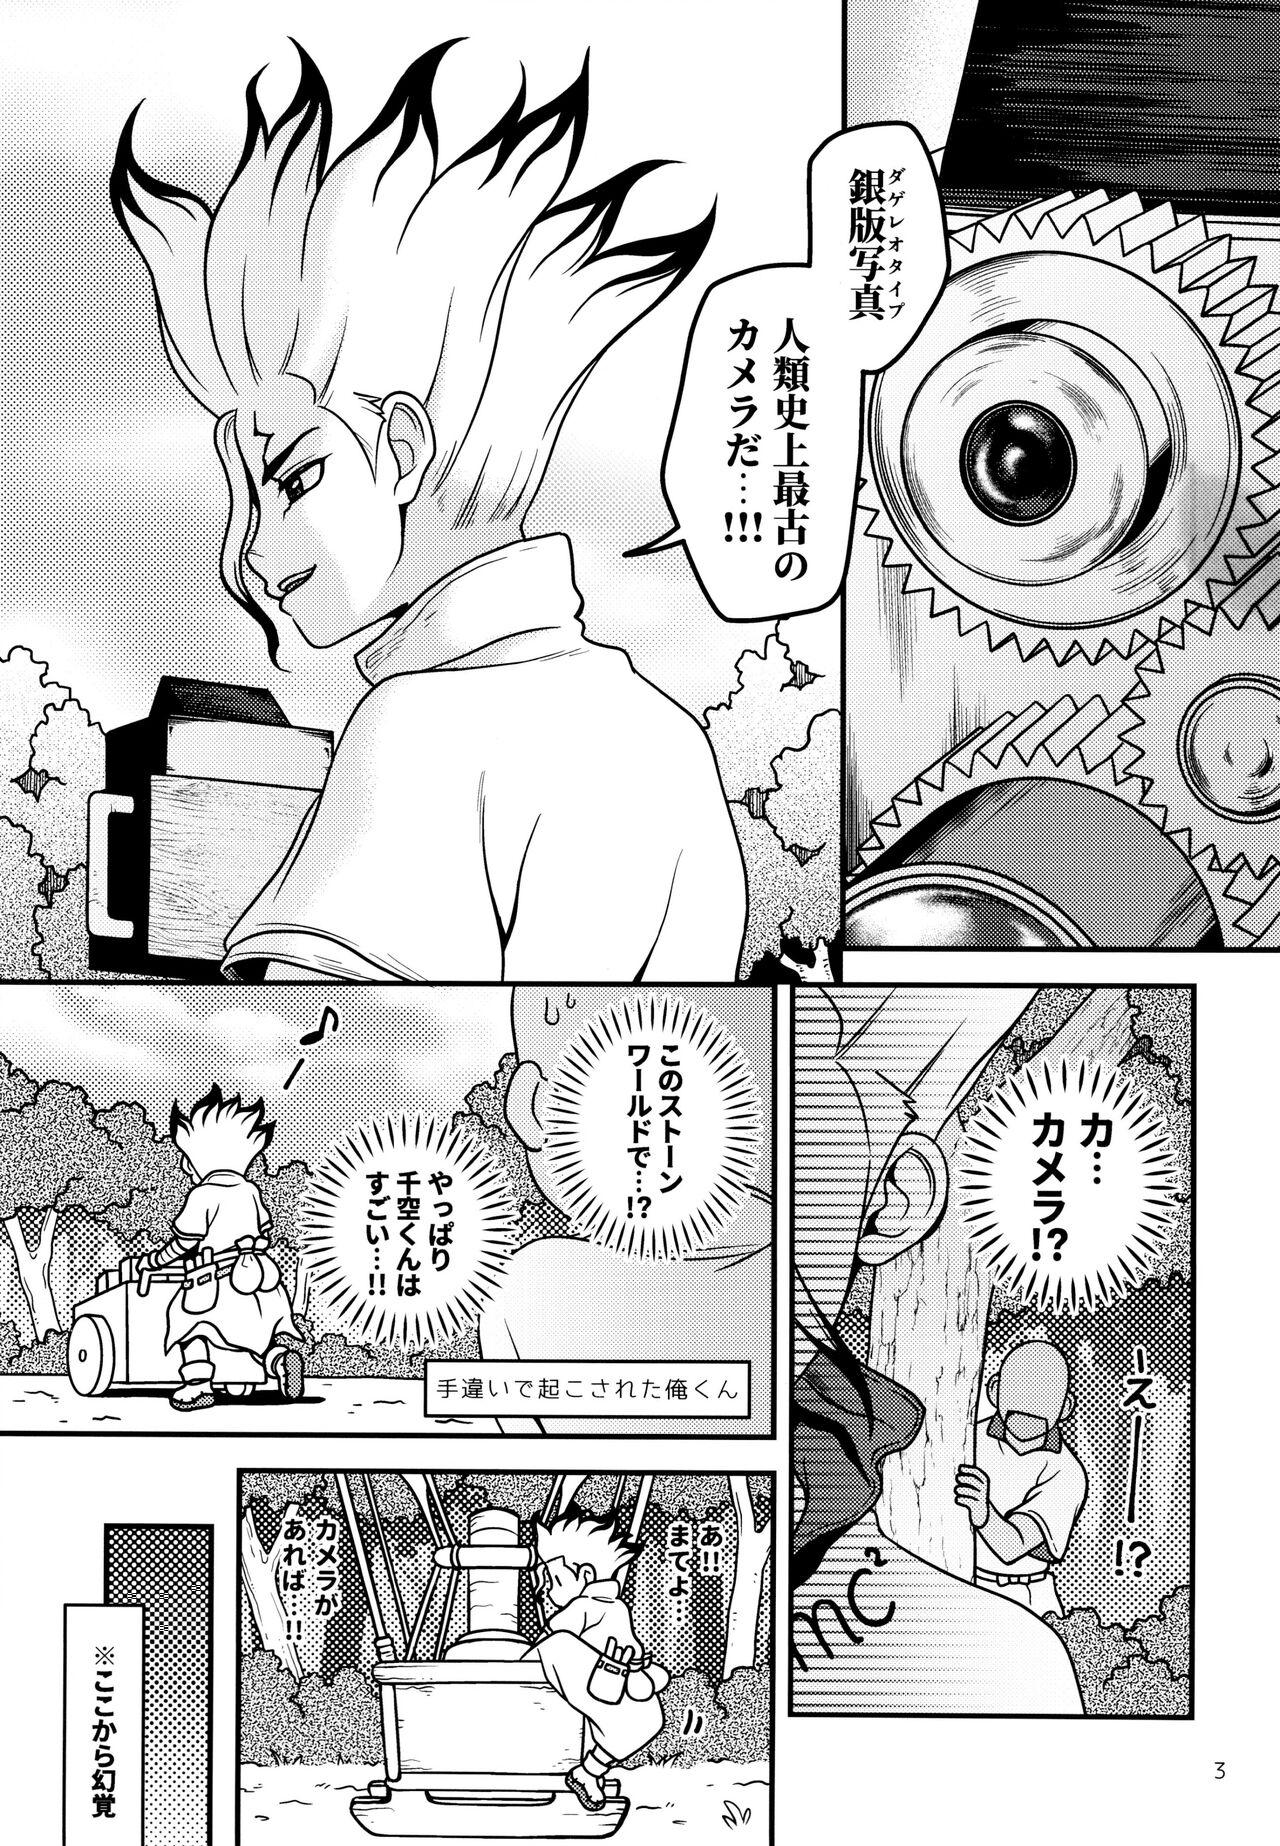 Gostosas My Photography - Dr. stone Real - Page 3